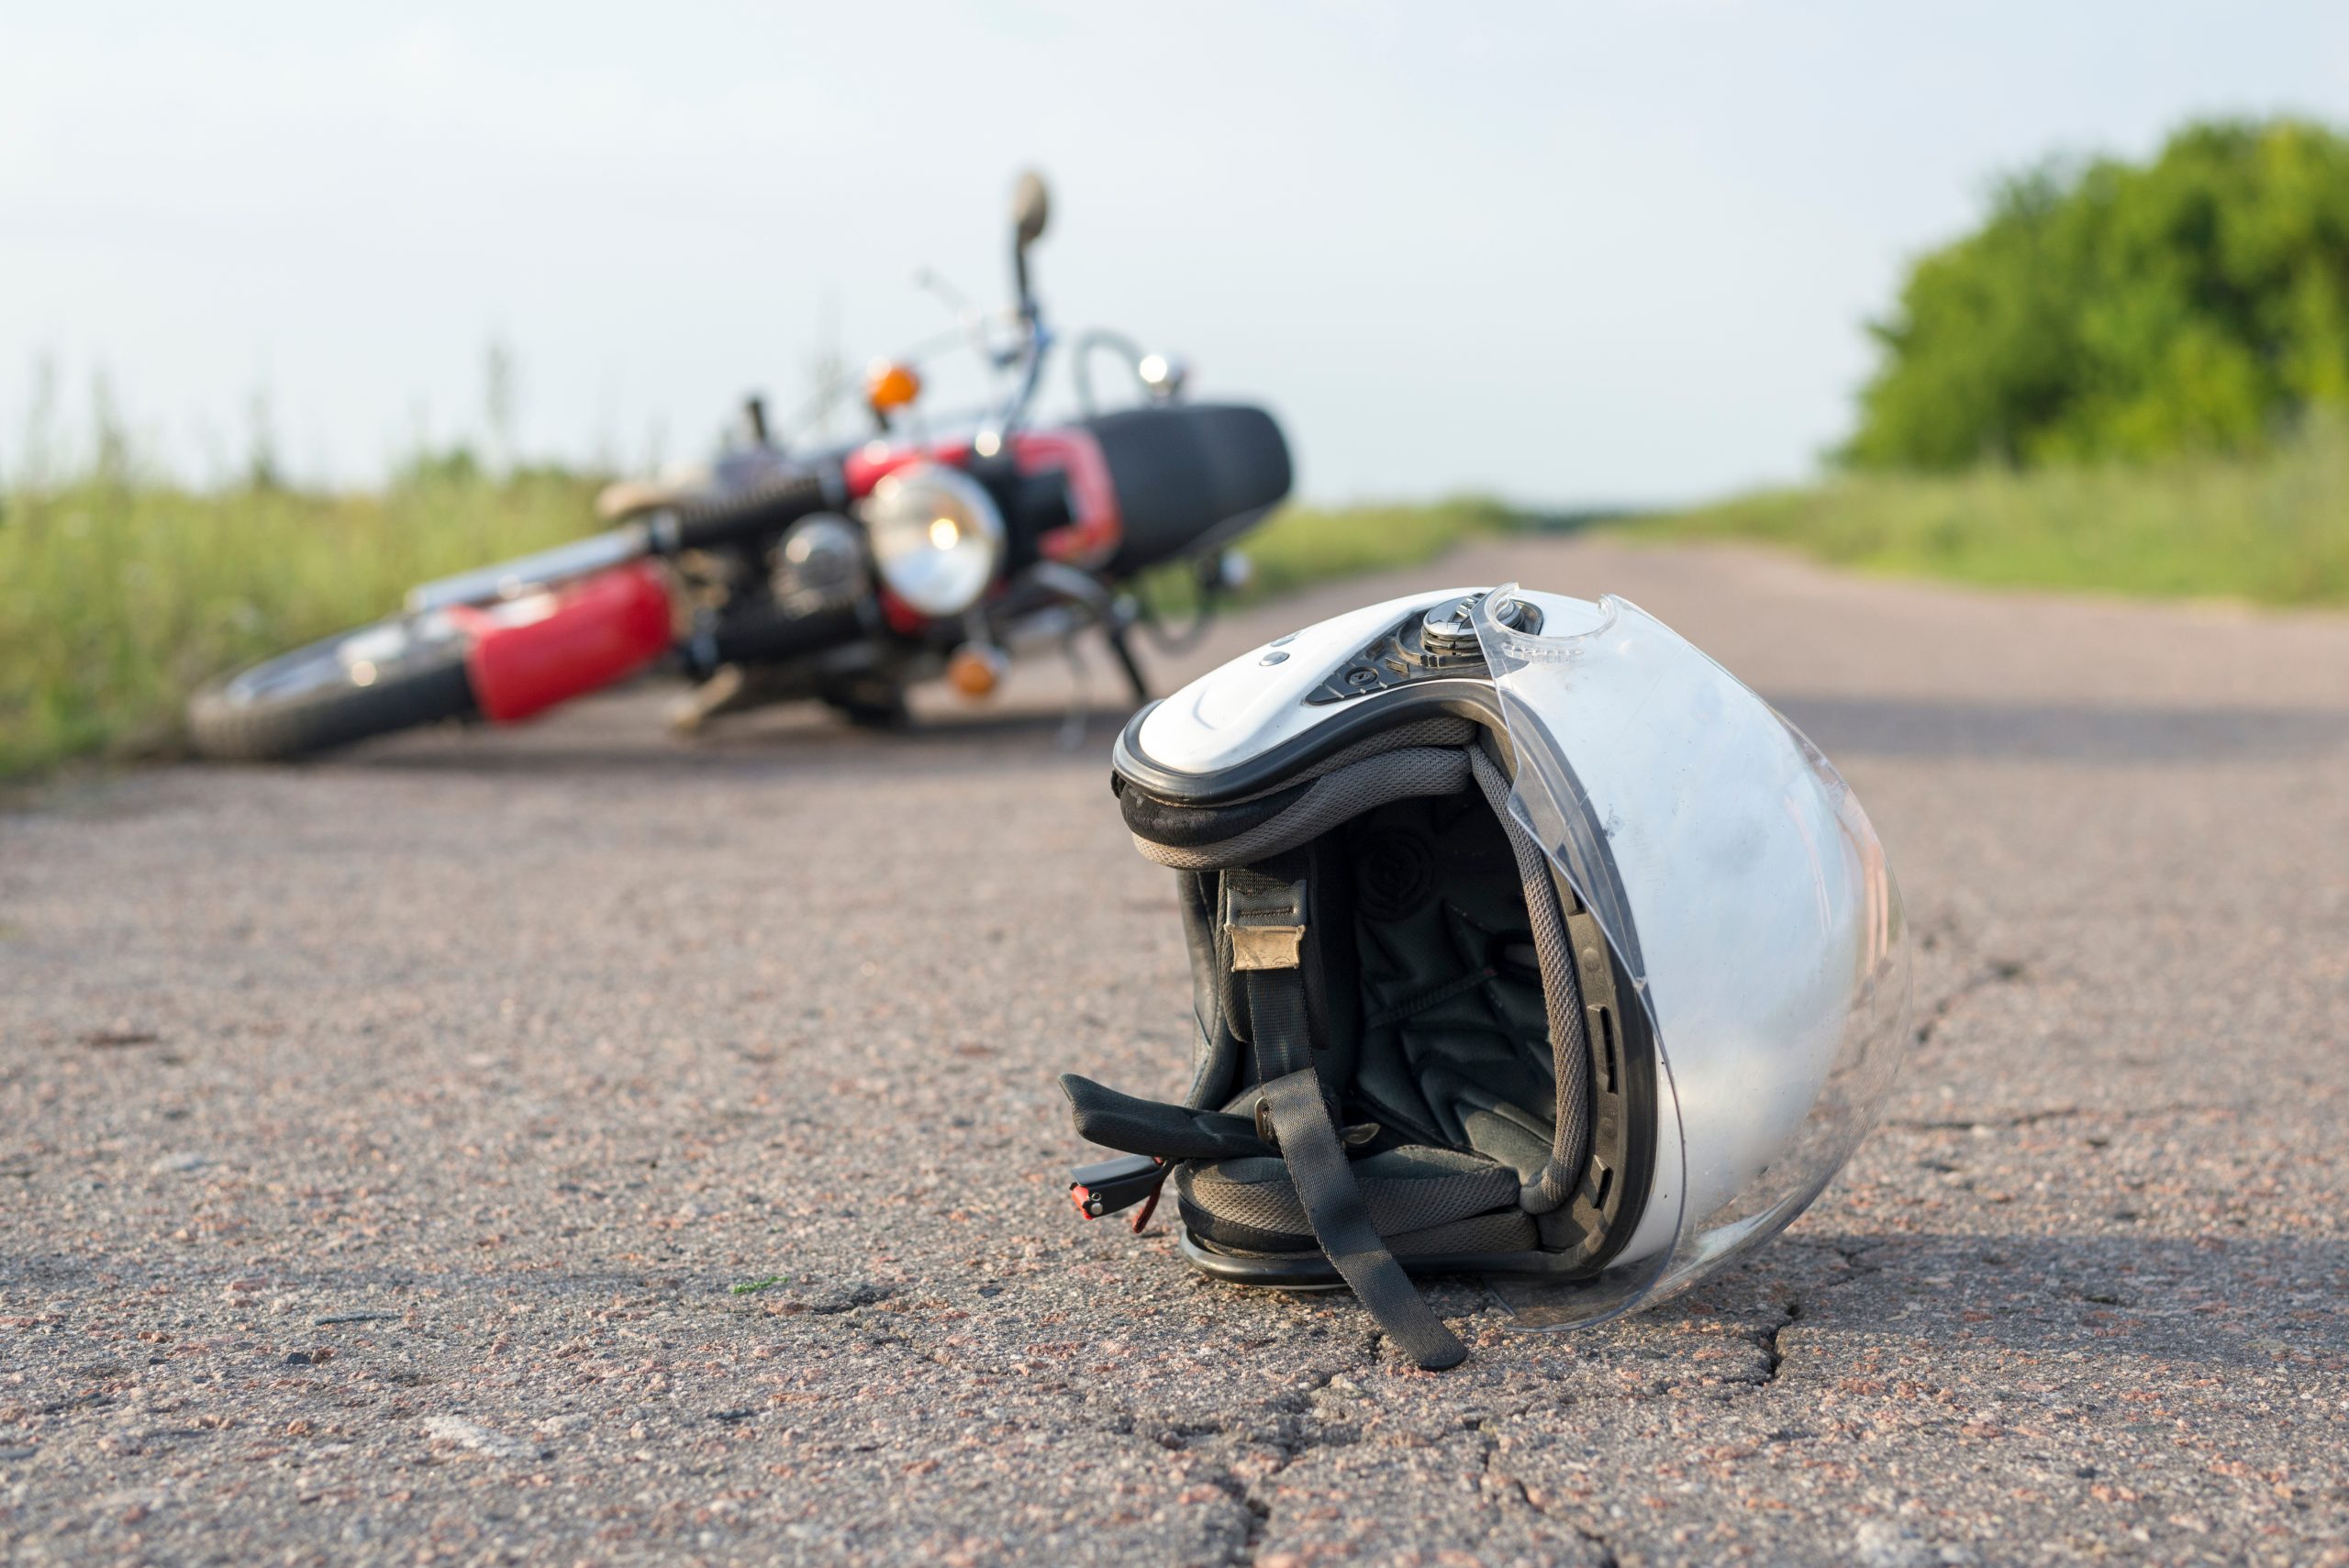 Why Should You Hire a Motorcycle Accident Lawyer?